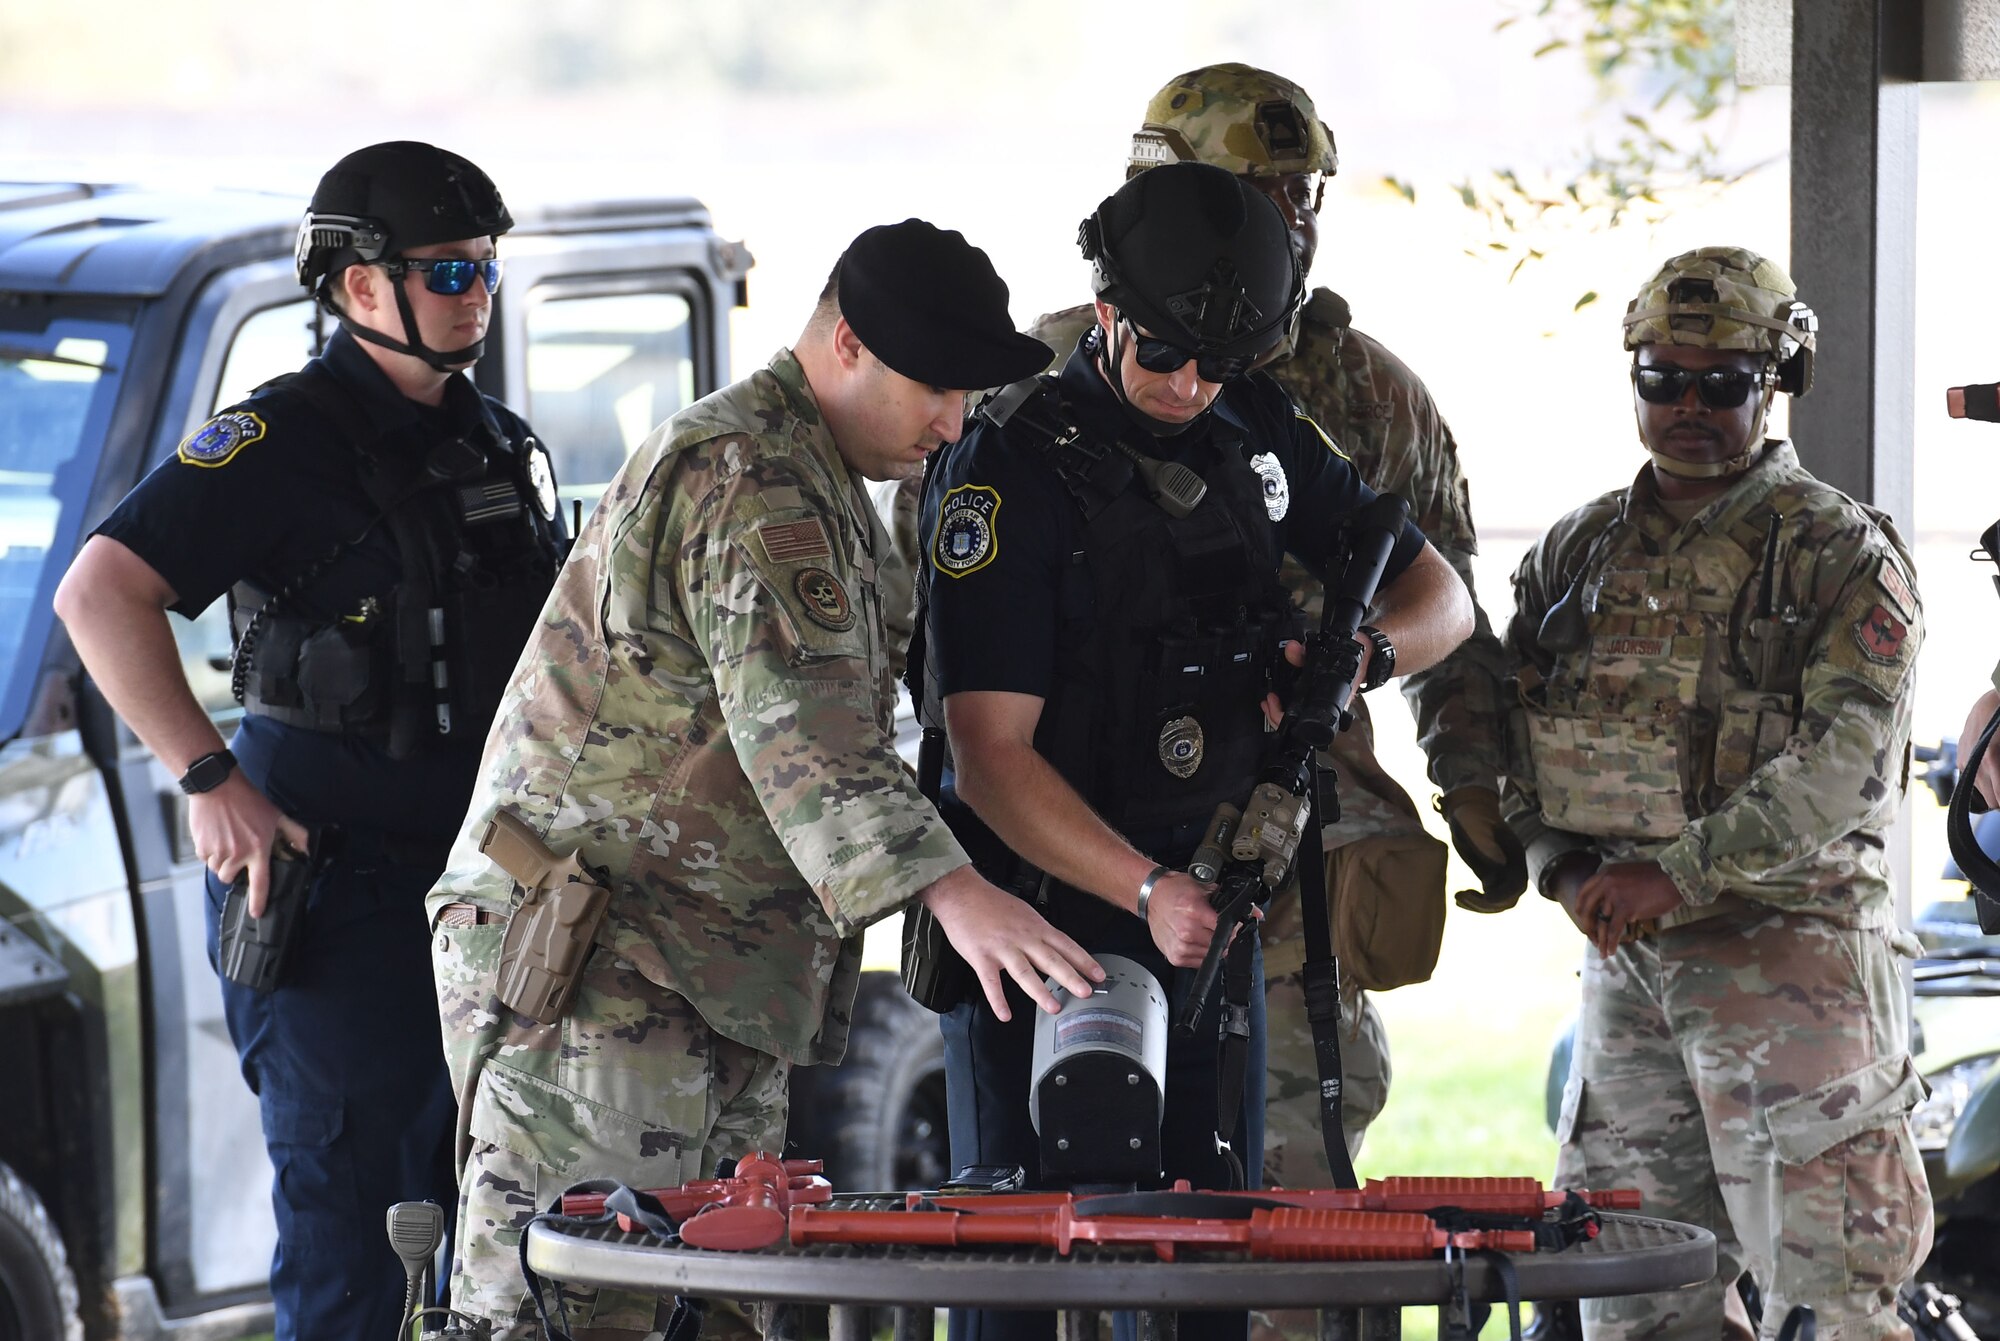 Members of the 81st Security Forces Squadron make a weapons exchange during an Antiterrorism, Force Protection and Chemical, Biological, Radiological, Nuclear exercise at Keesler Air Force Base, Mississippi, March 17, 2022. The exercise tested the base's ability to respond to and recover from a mass casualty event. (U.S. Air Force photo by Kemberly Groue)